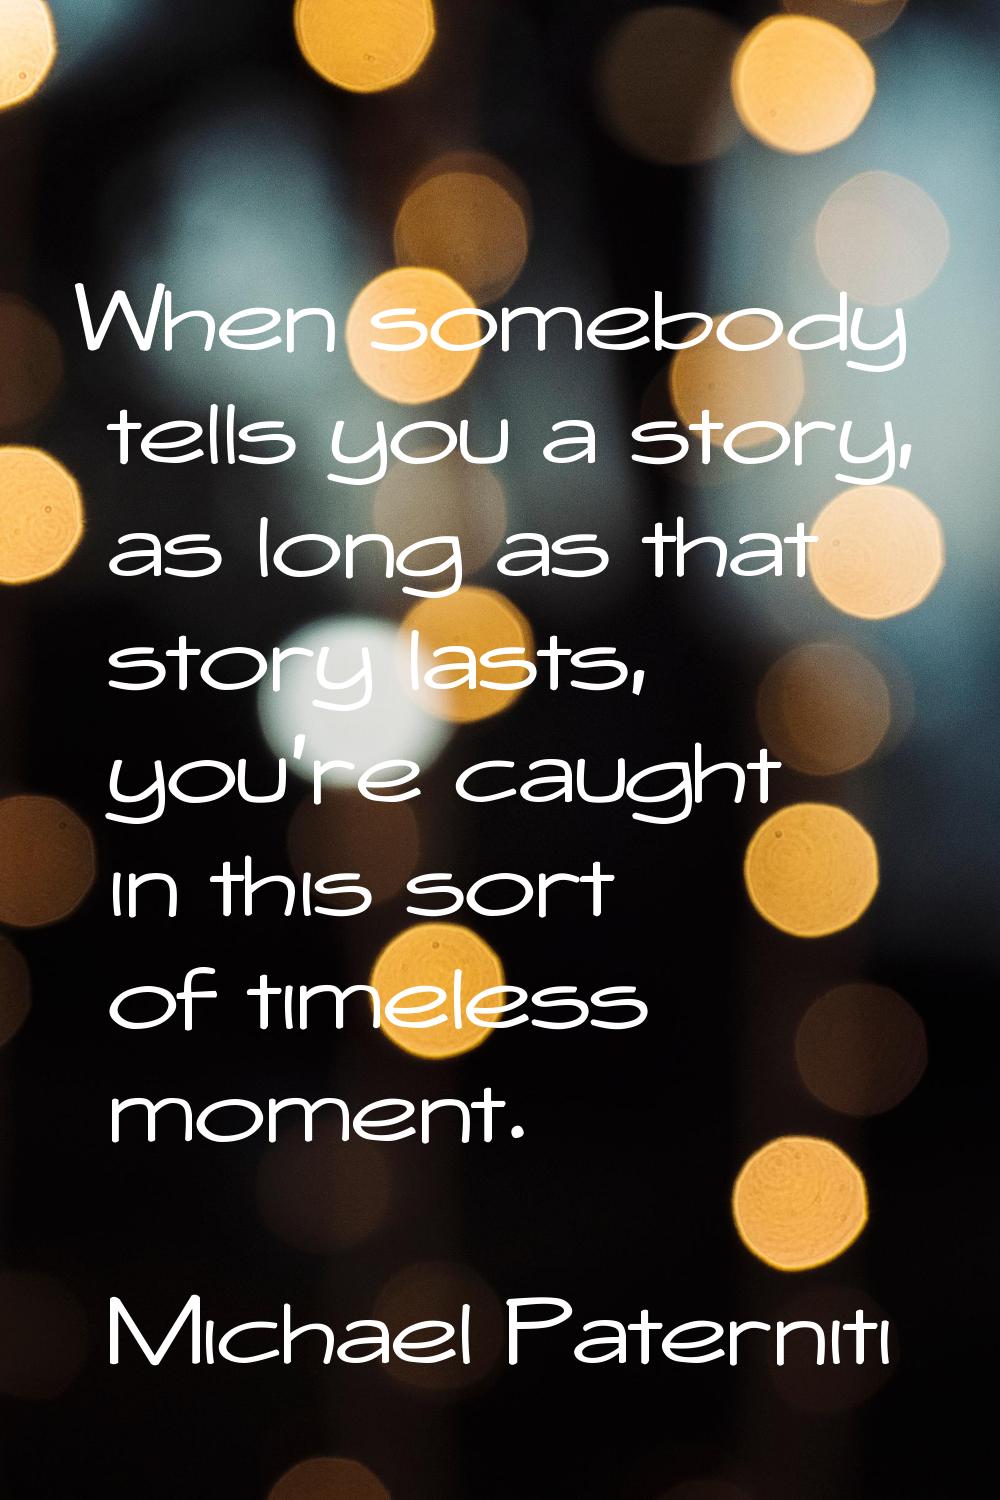 When somebody tells you a story, as long as that story lasts, you're caught in this sort of timeles